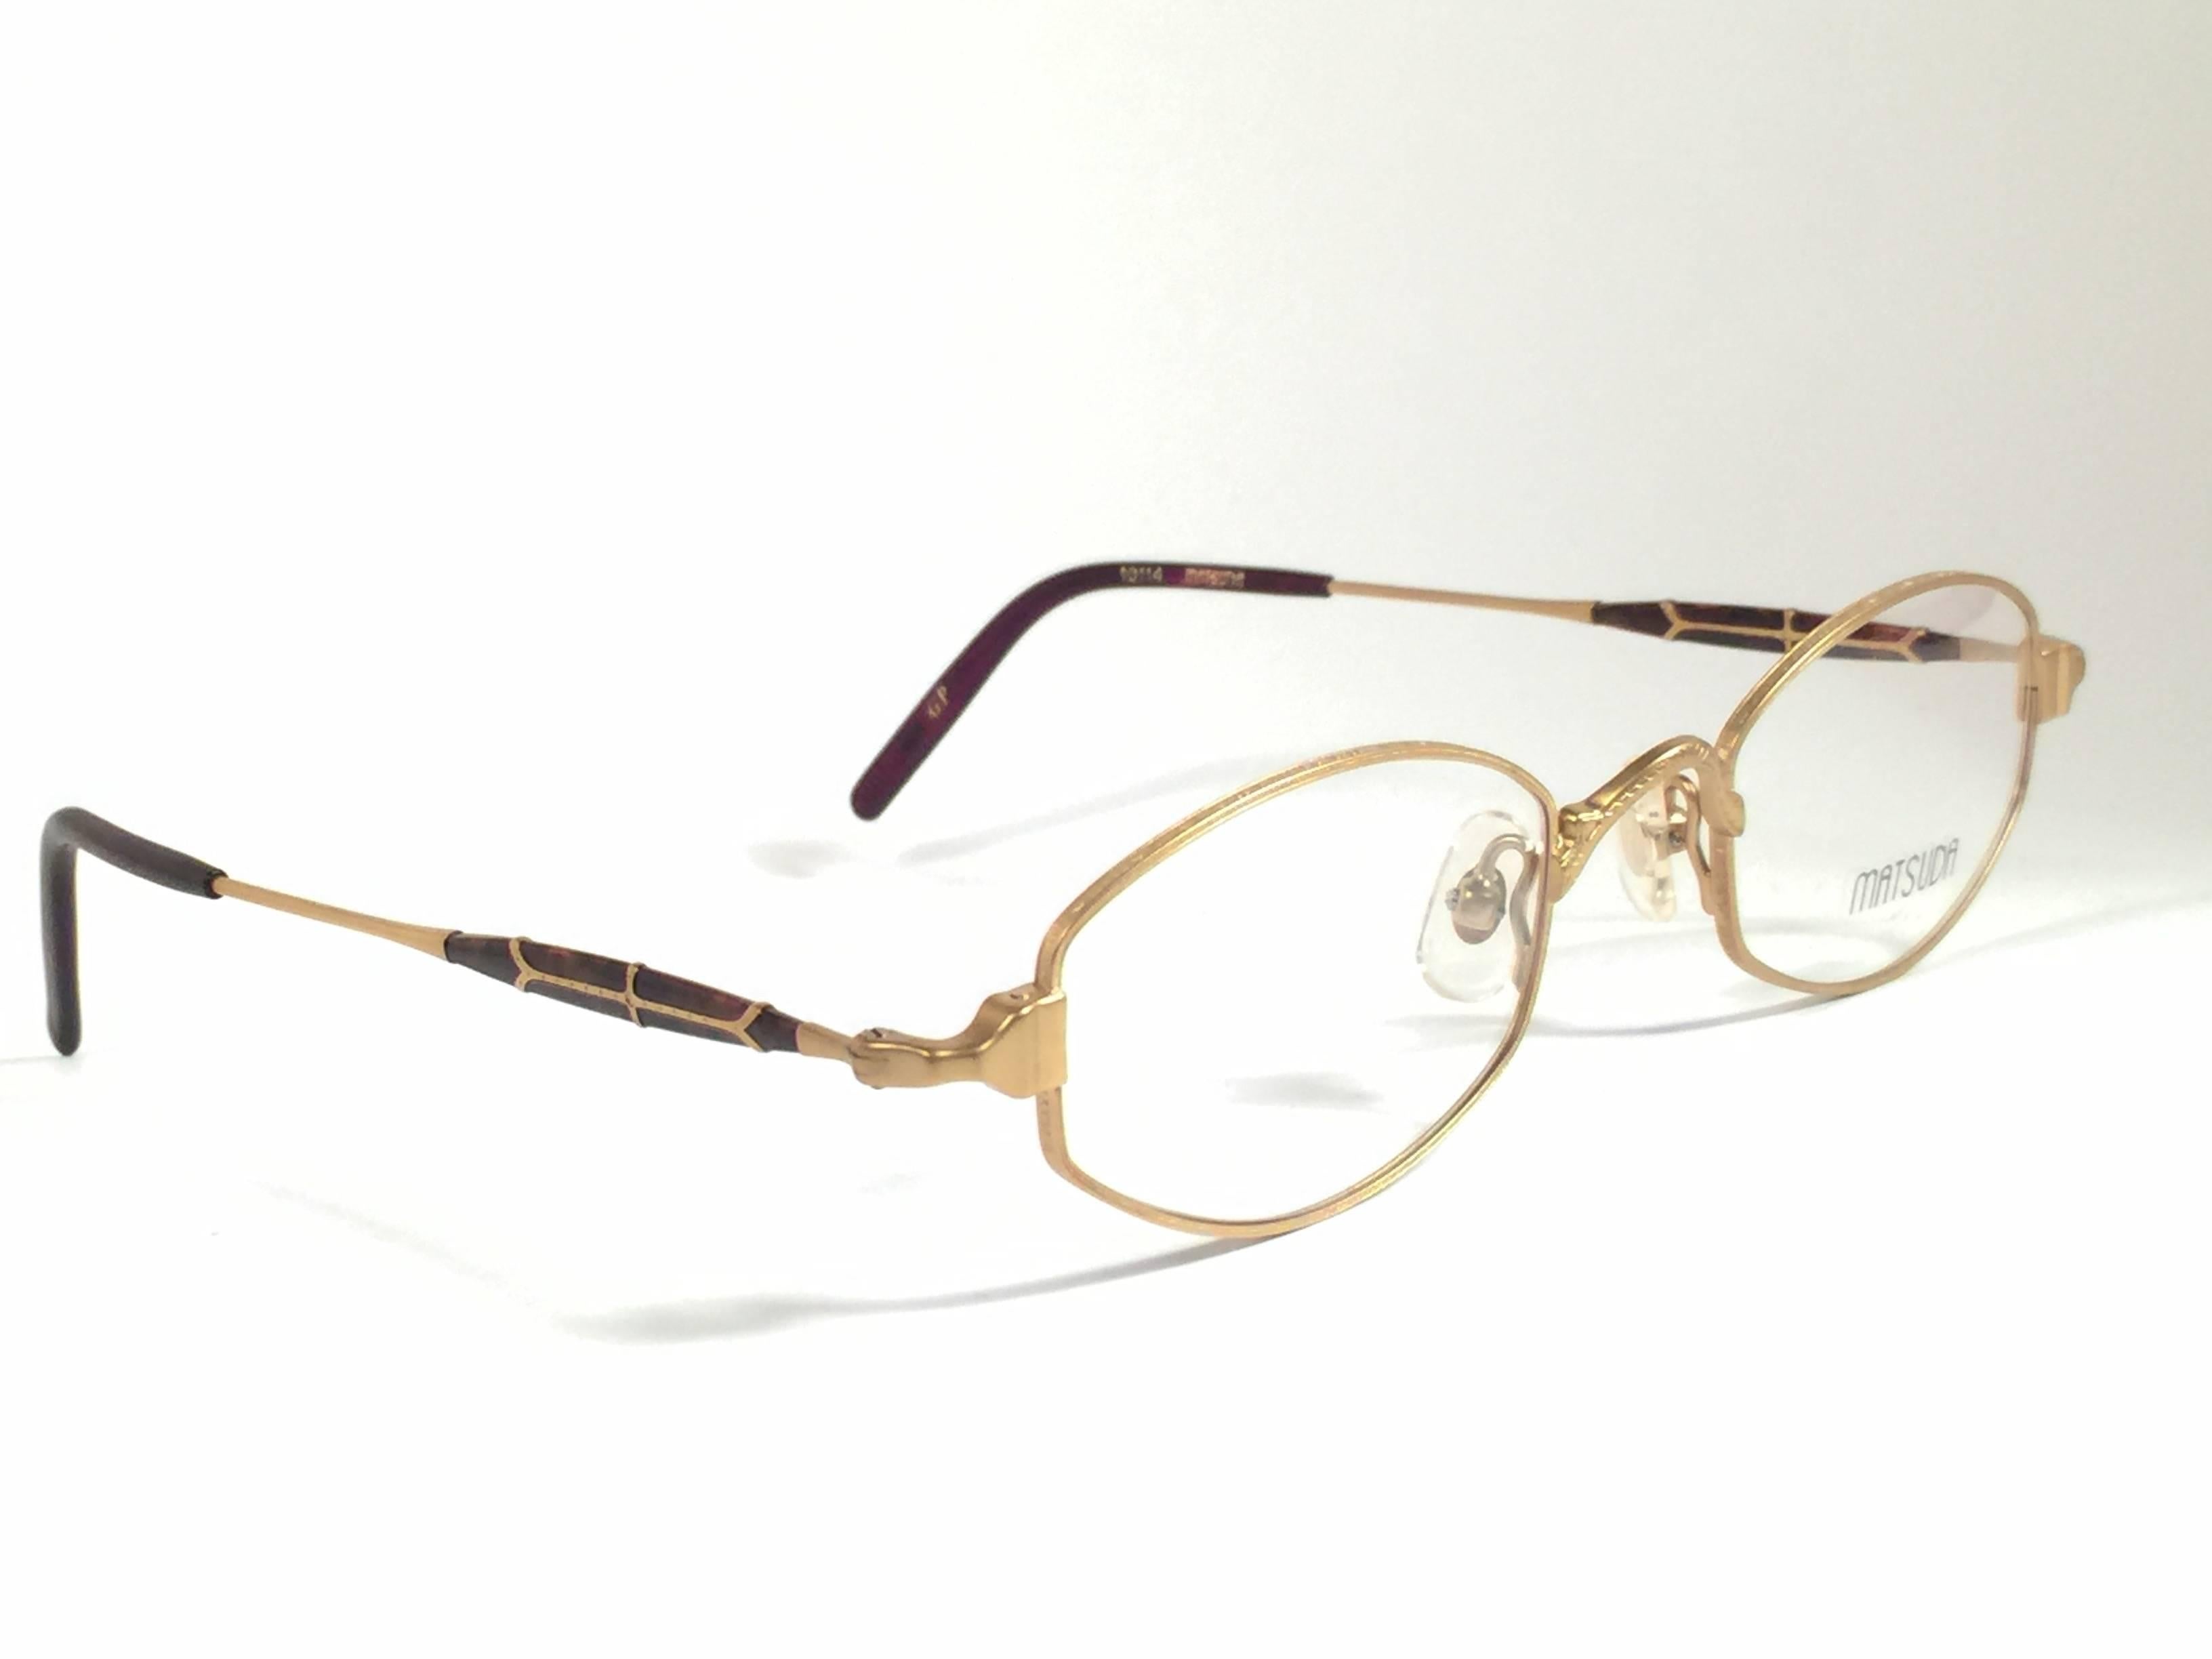 
Cult brand Matsuda signed this ultra chic pair of matte gold frame with elaborated accents sunglasses. 

An amazing pair for your prescription sunglasses.

Superior quality and design. 

New, never worn or displayed. Made in japan.
